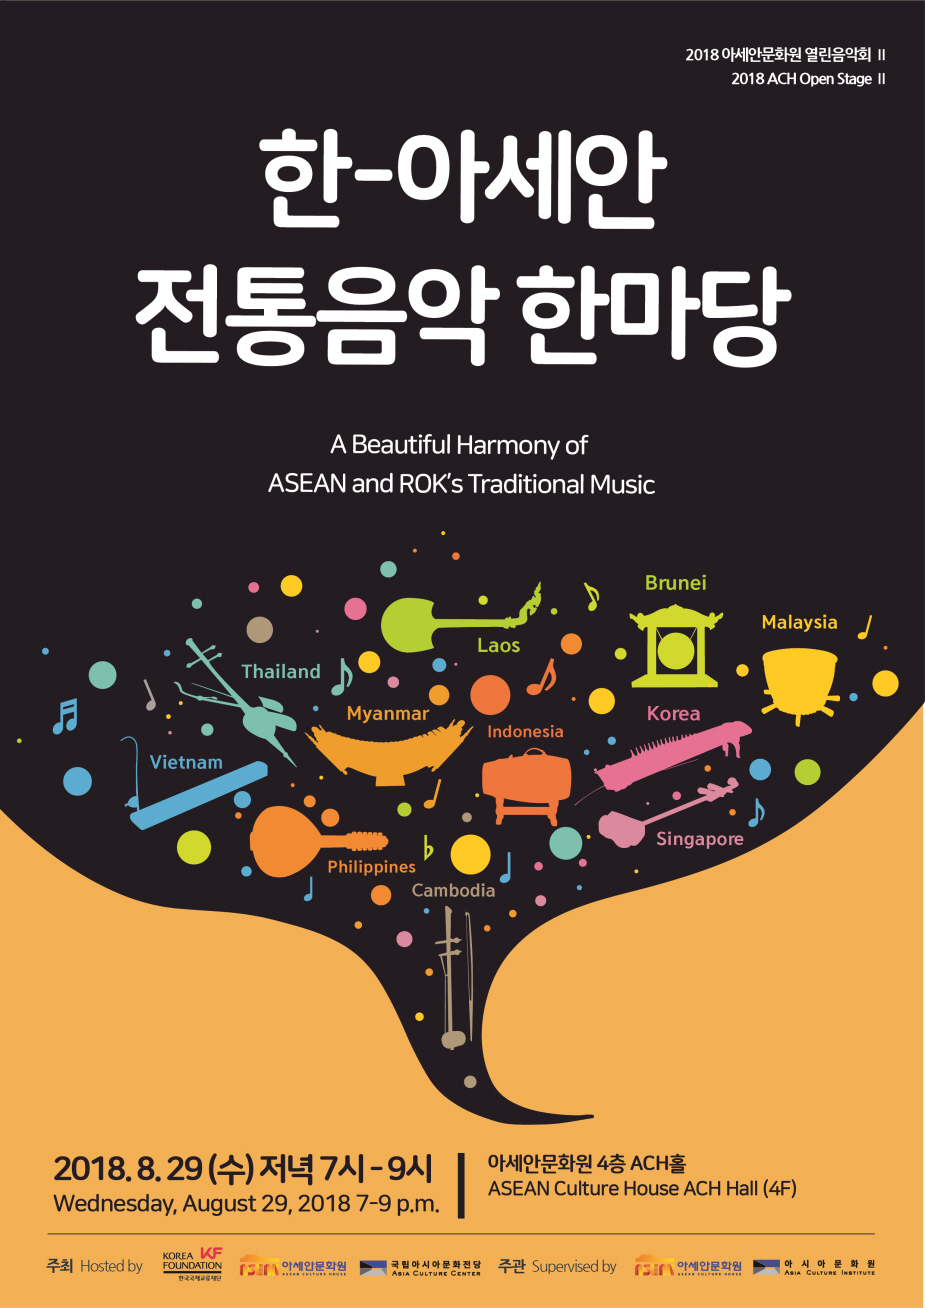 A Beautiful Harmony of ASEAN and ROK's Traditional Music 